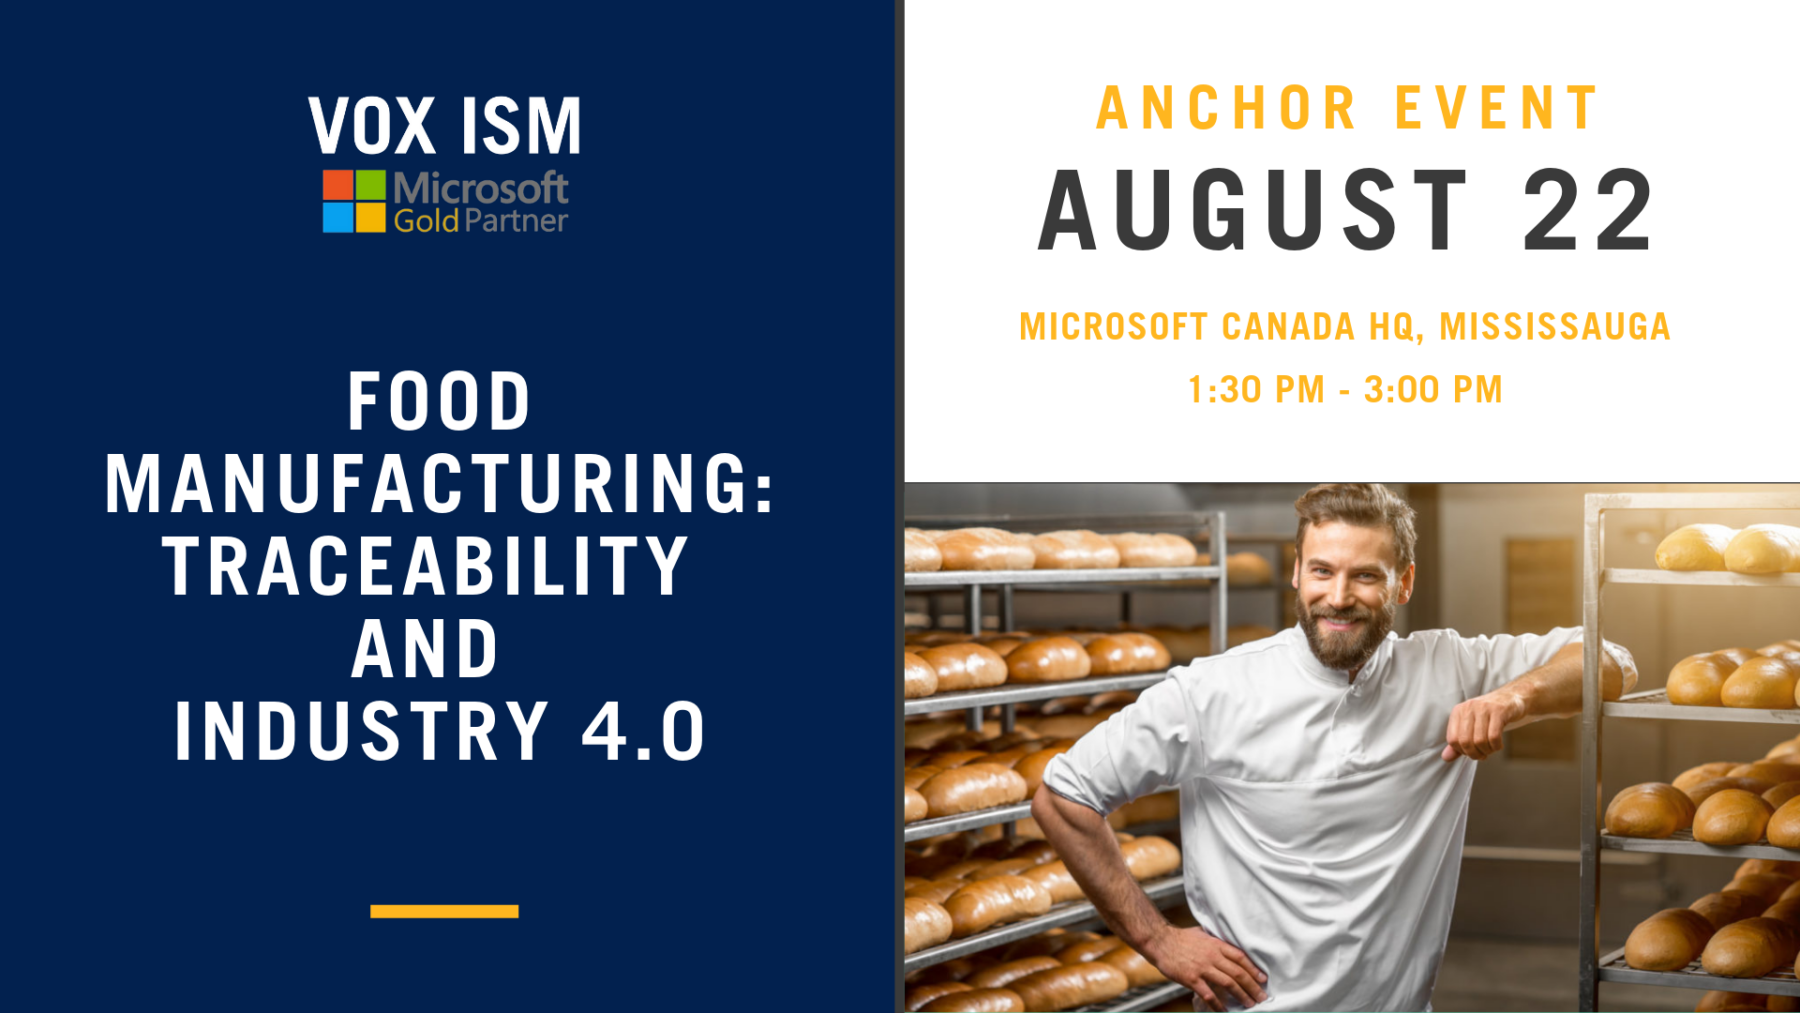 Food Manufacturing: Traceability and Industry 4.0 - August 22 - Anchor Event - VOX ISM